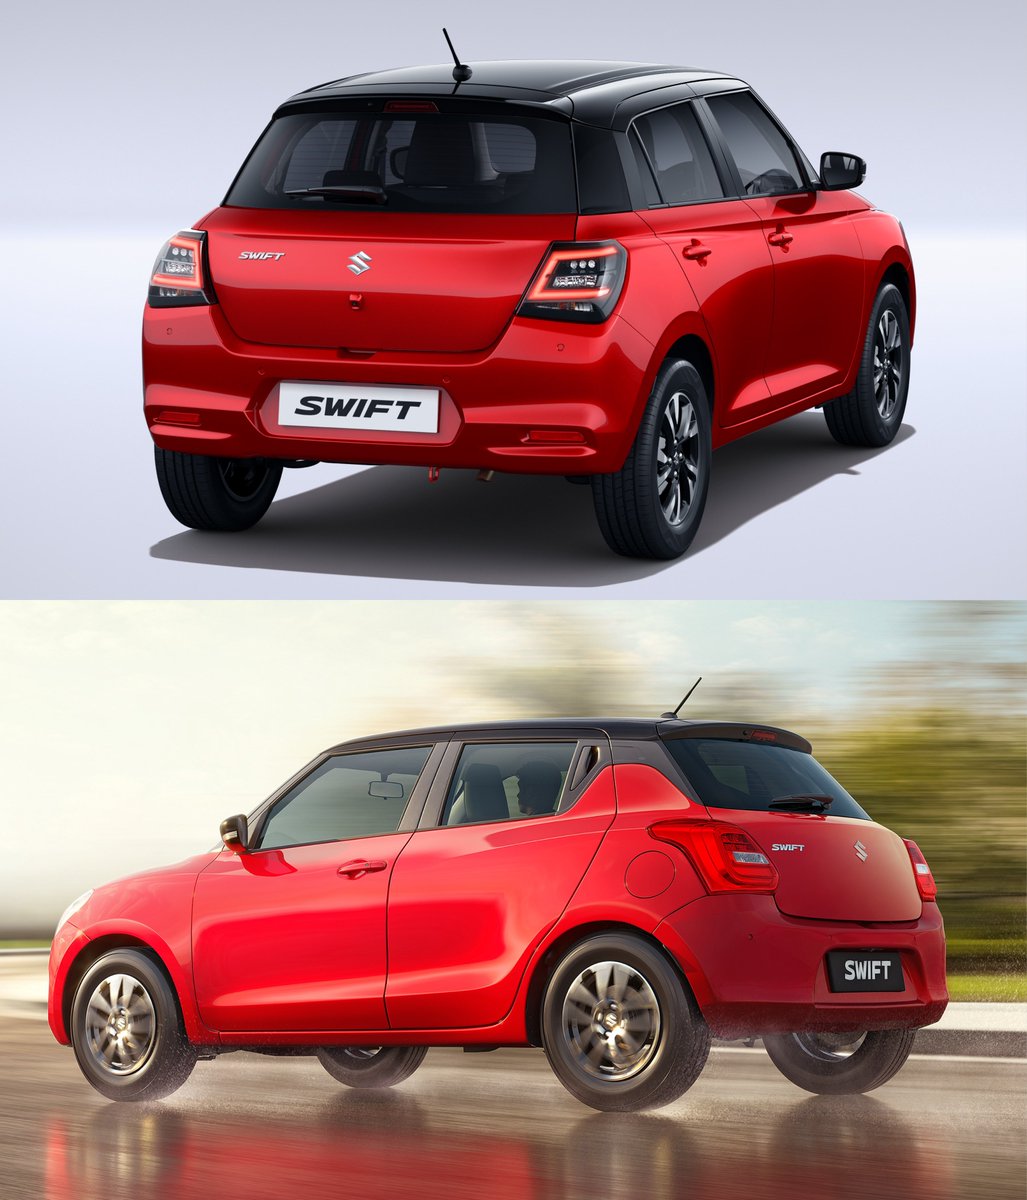 Maruti Swift - old vs new

The design is evolutionary while retaining the original DNA

How do you like the updated styling?